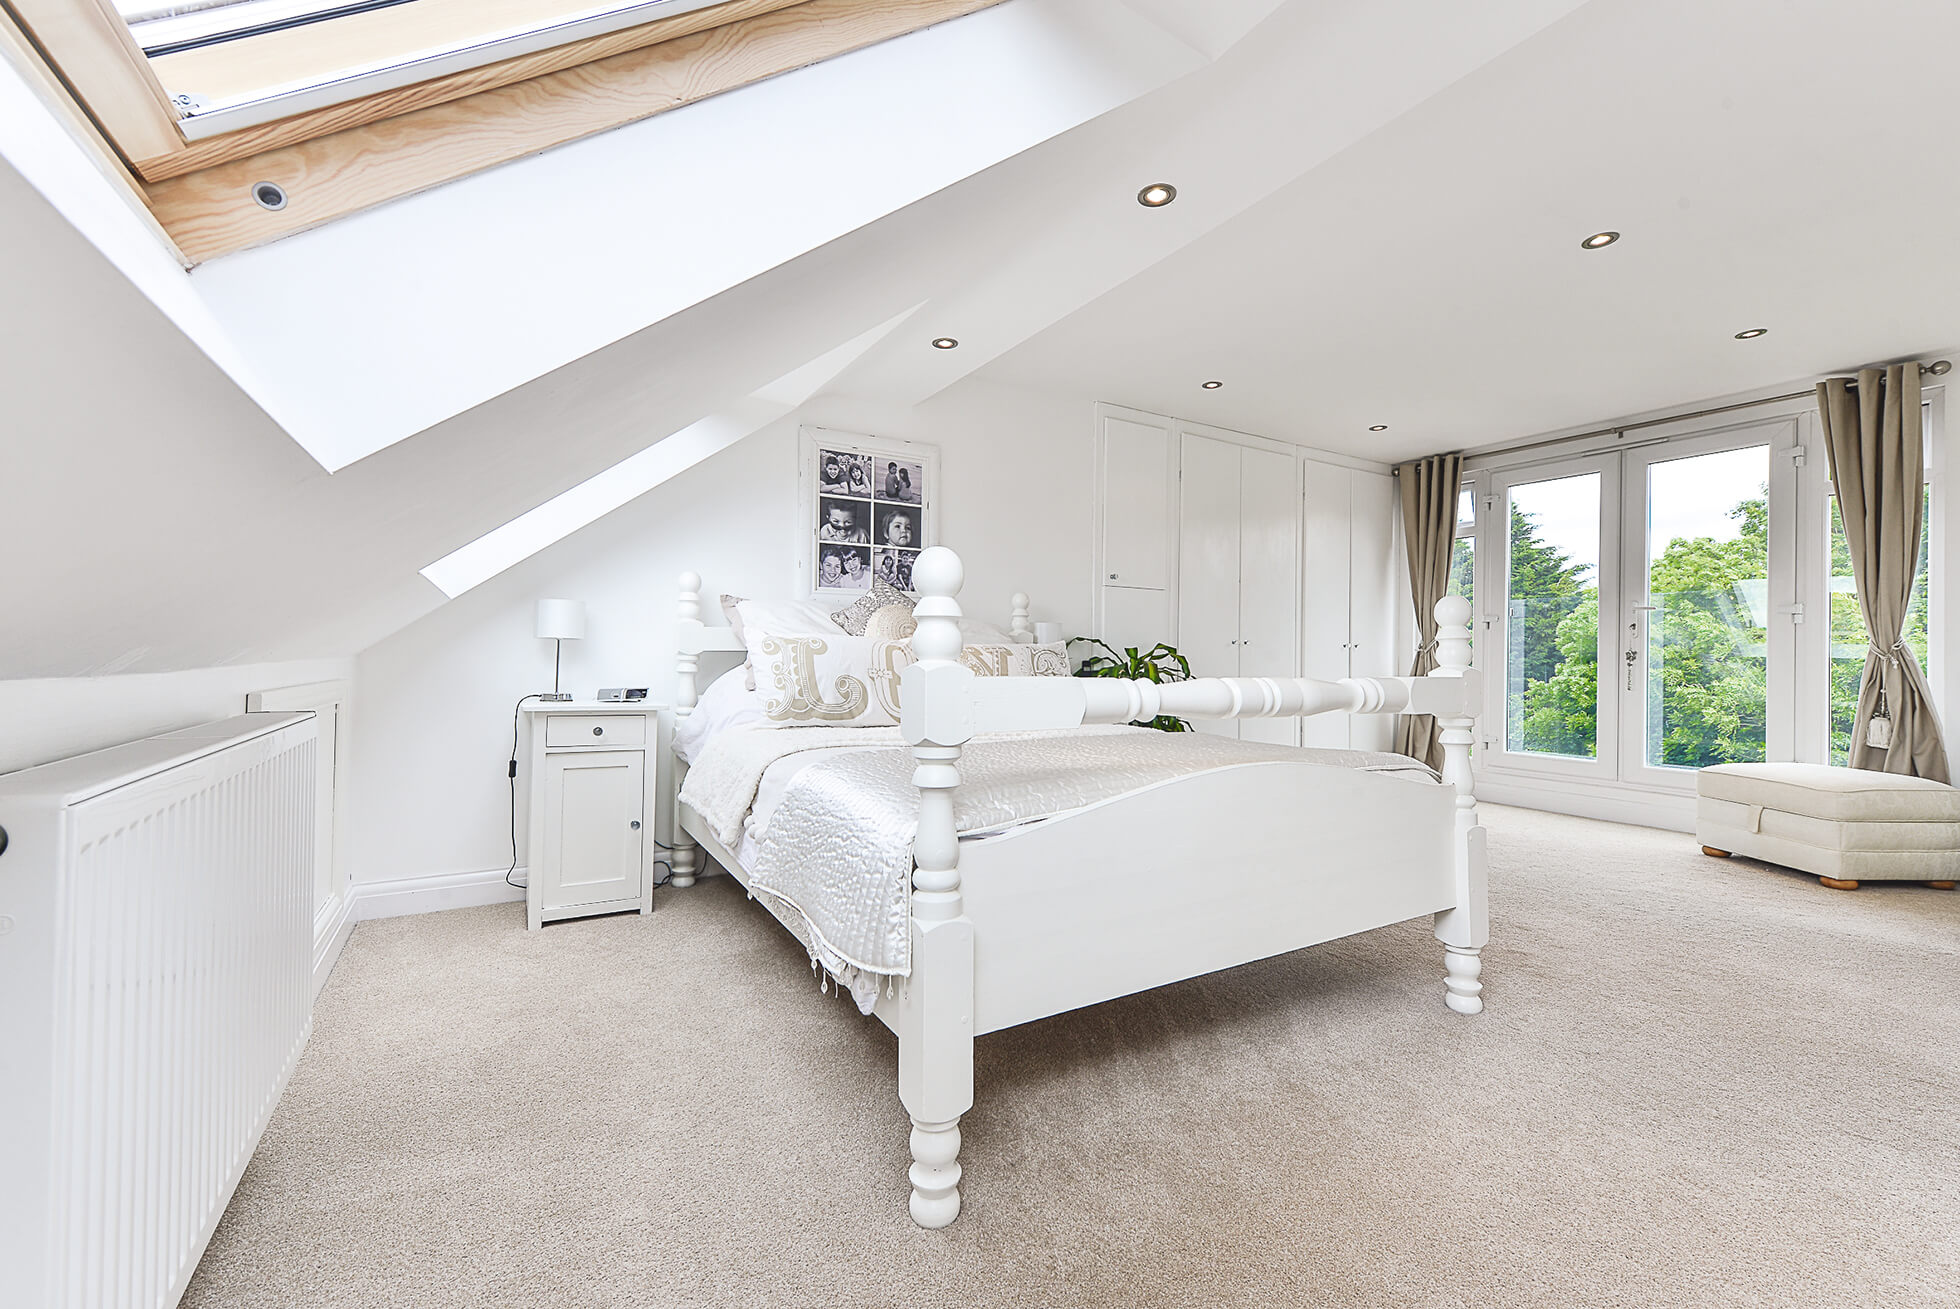 Do you have a question about converting your Loft in Tonwell? Here are the most popular questions asked by our clients.